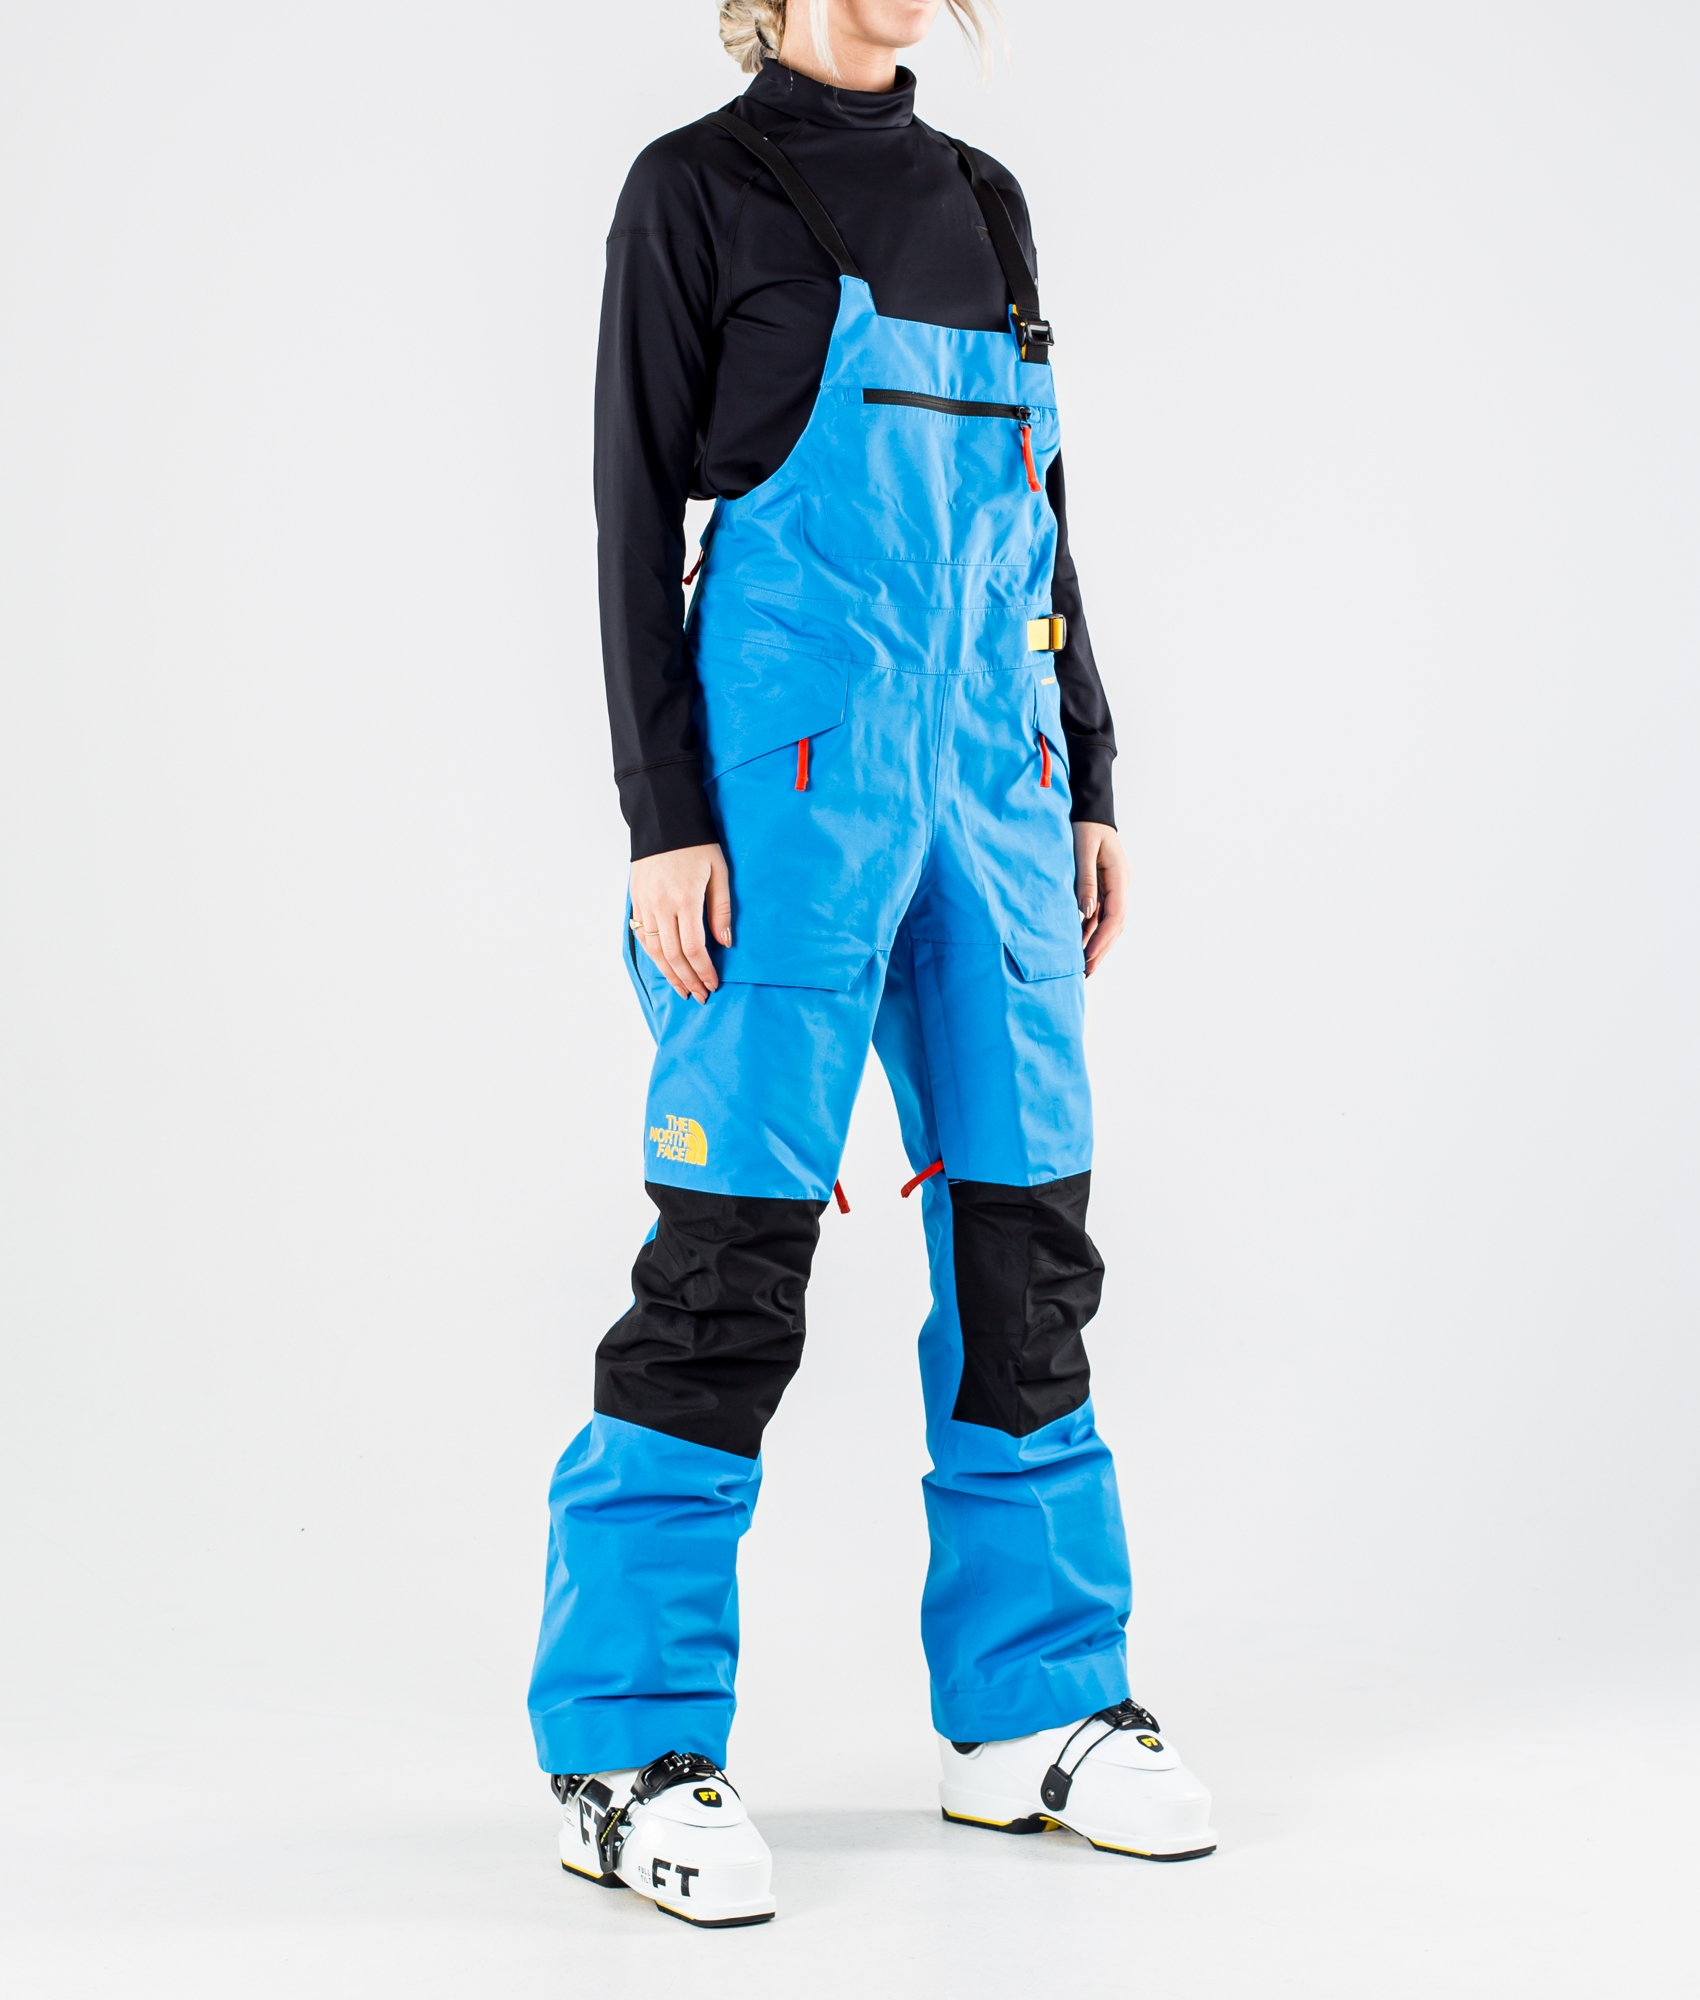 The North Face Team Kit Ski Pants Clear 